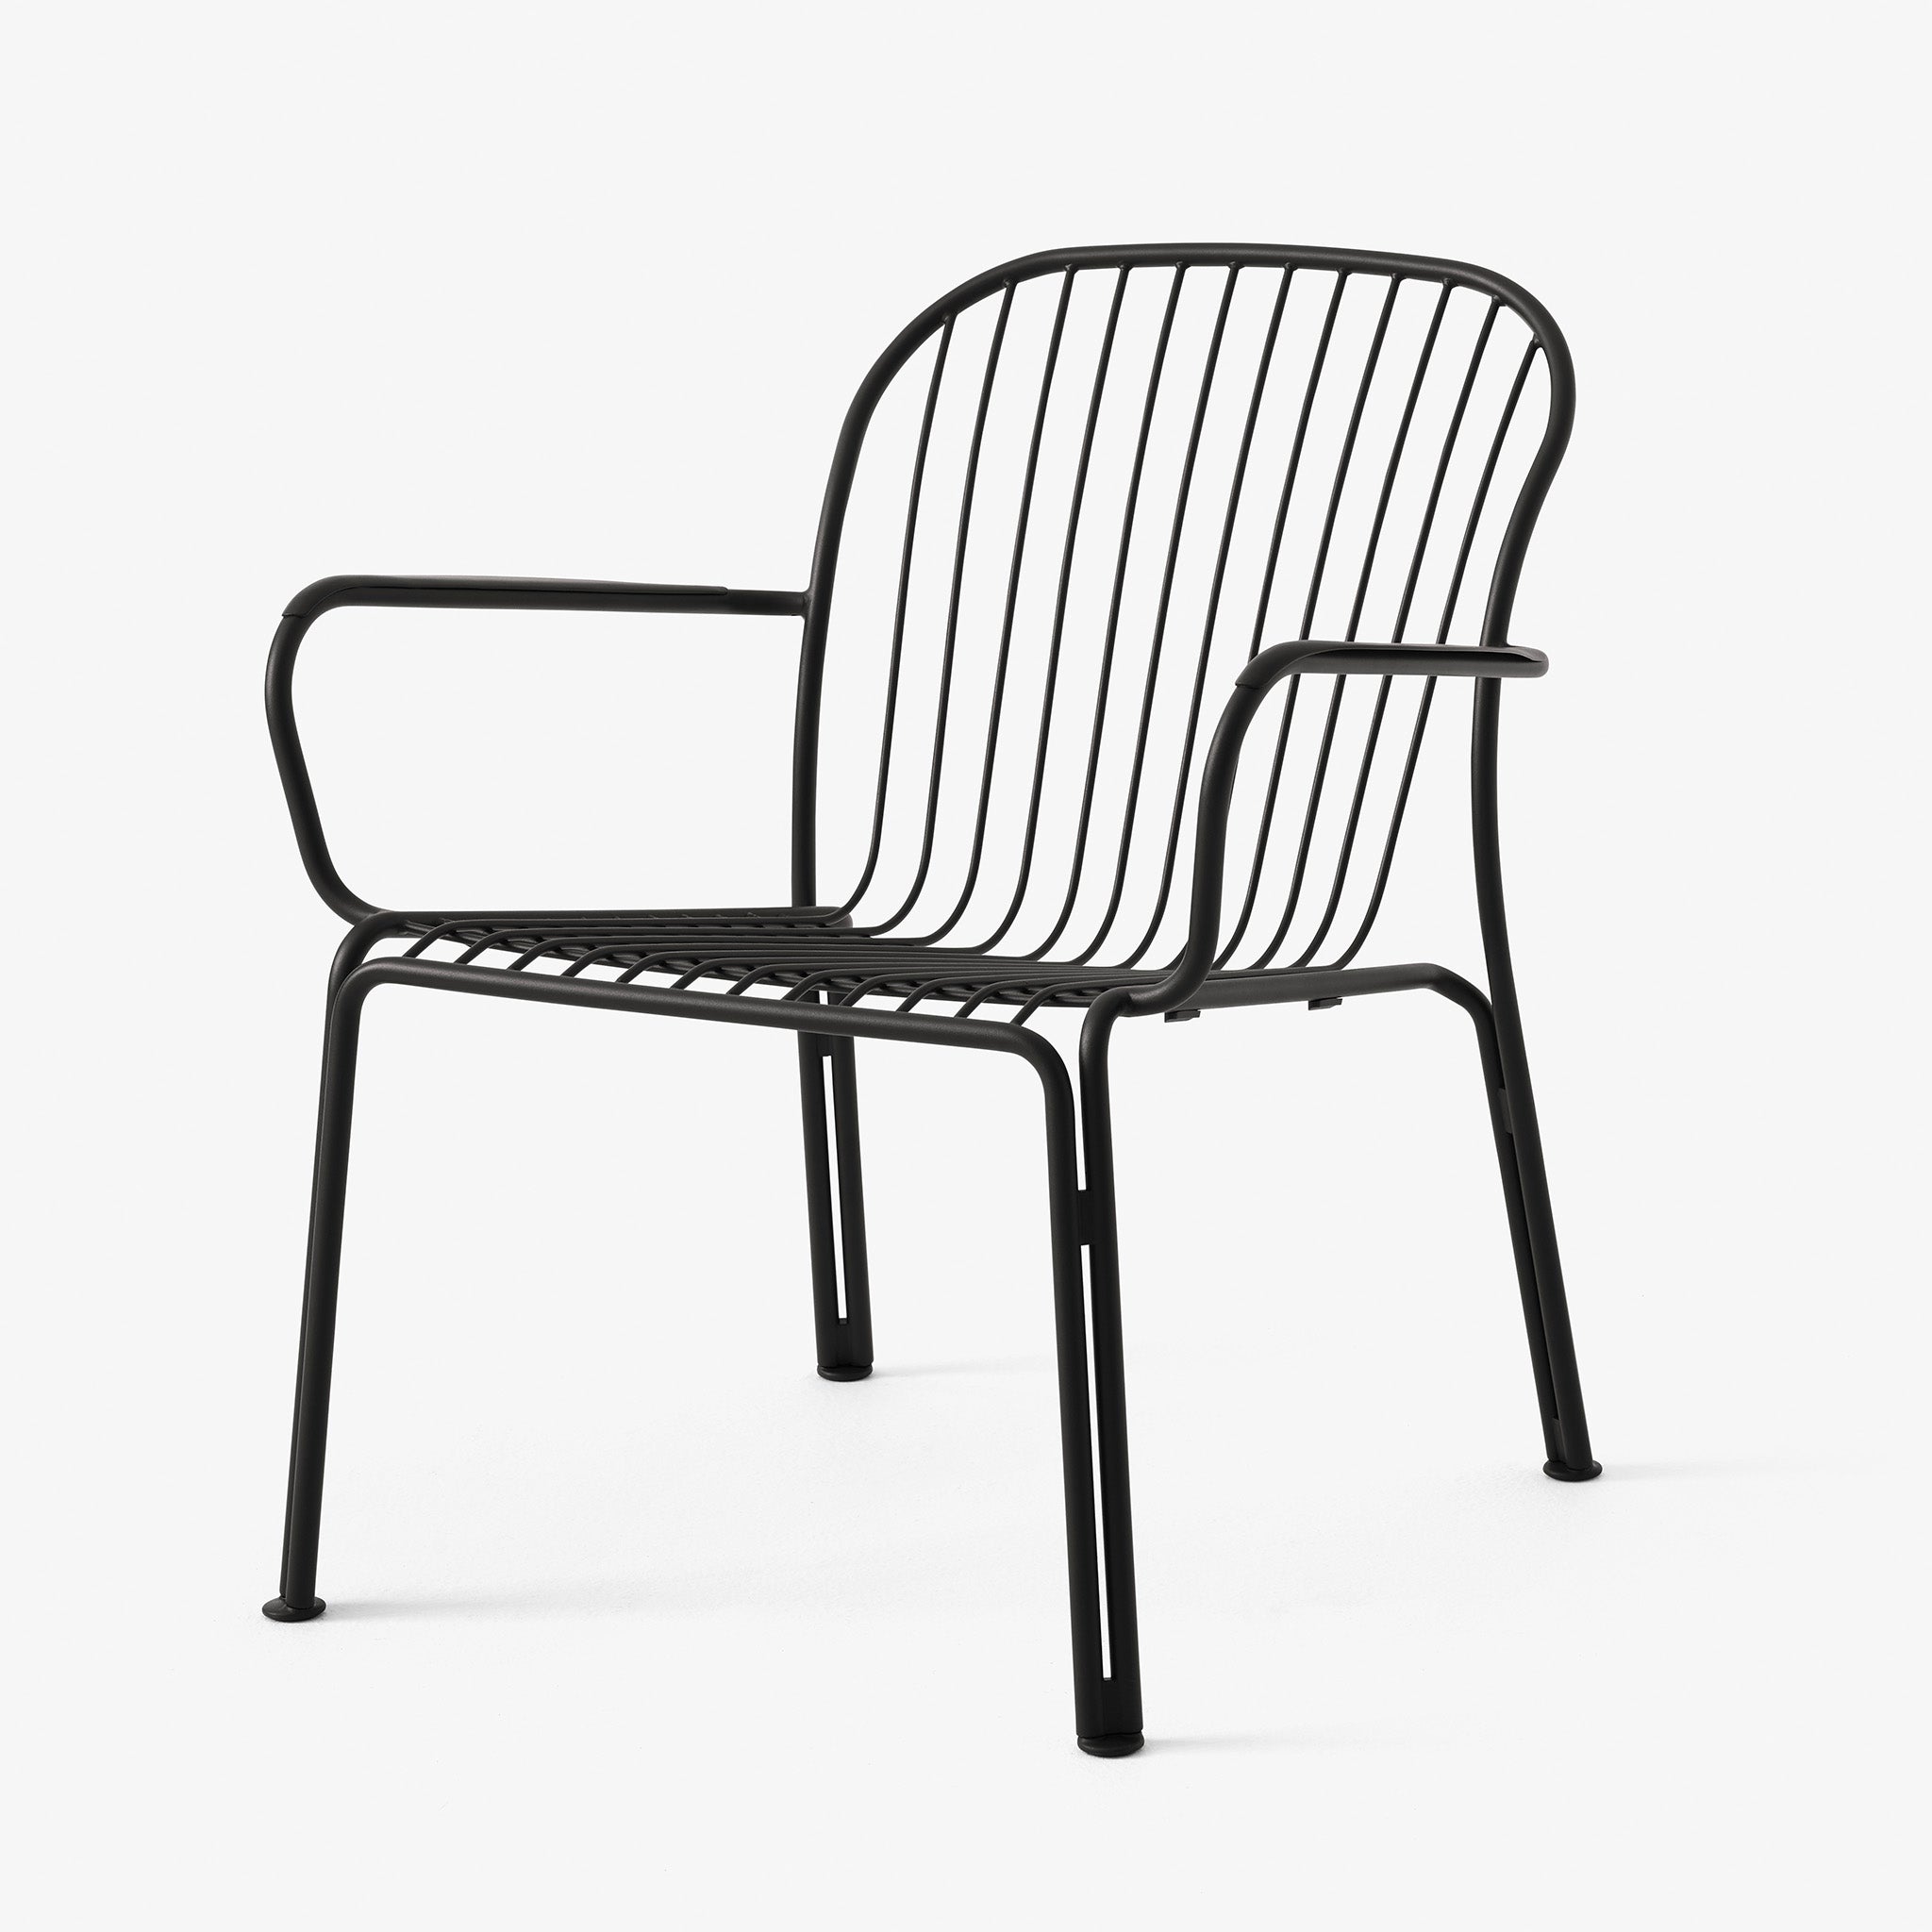 Thorvald SC101 Outdoor Lounge Armchair by Space Copenhagen